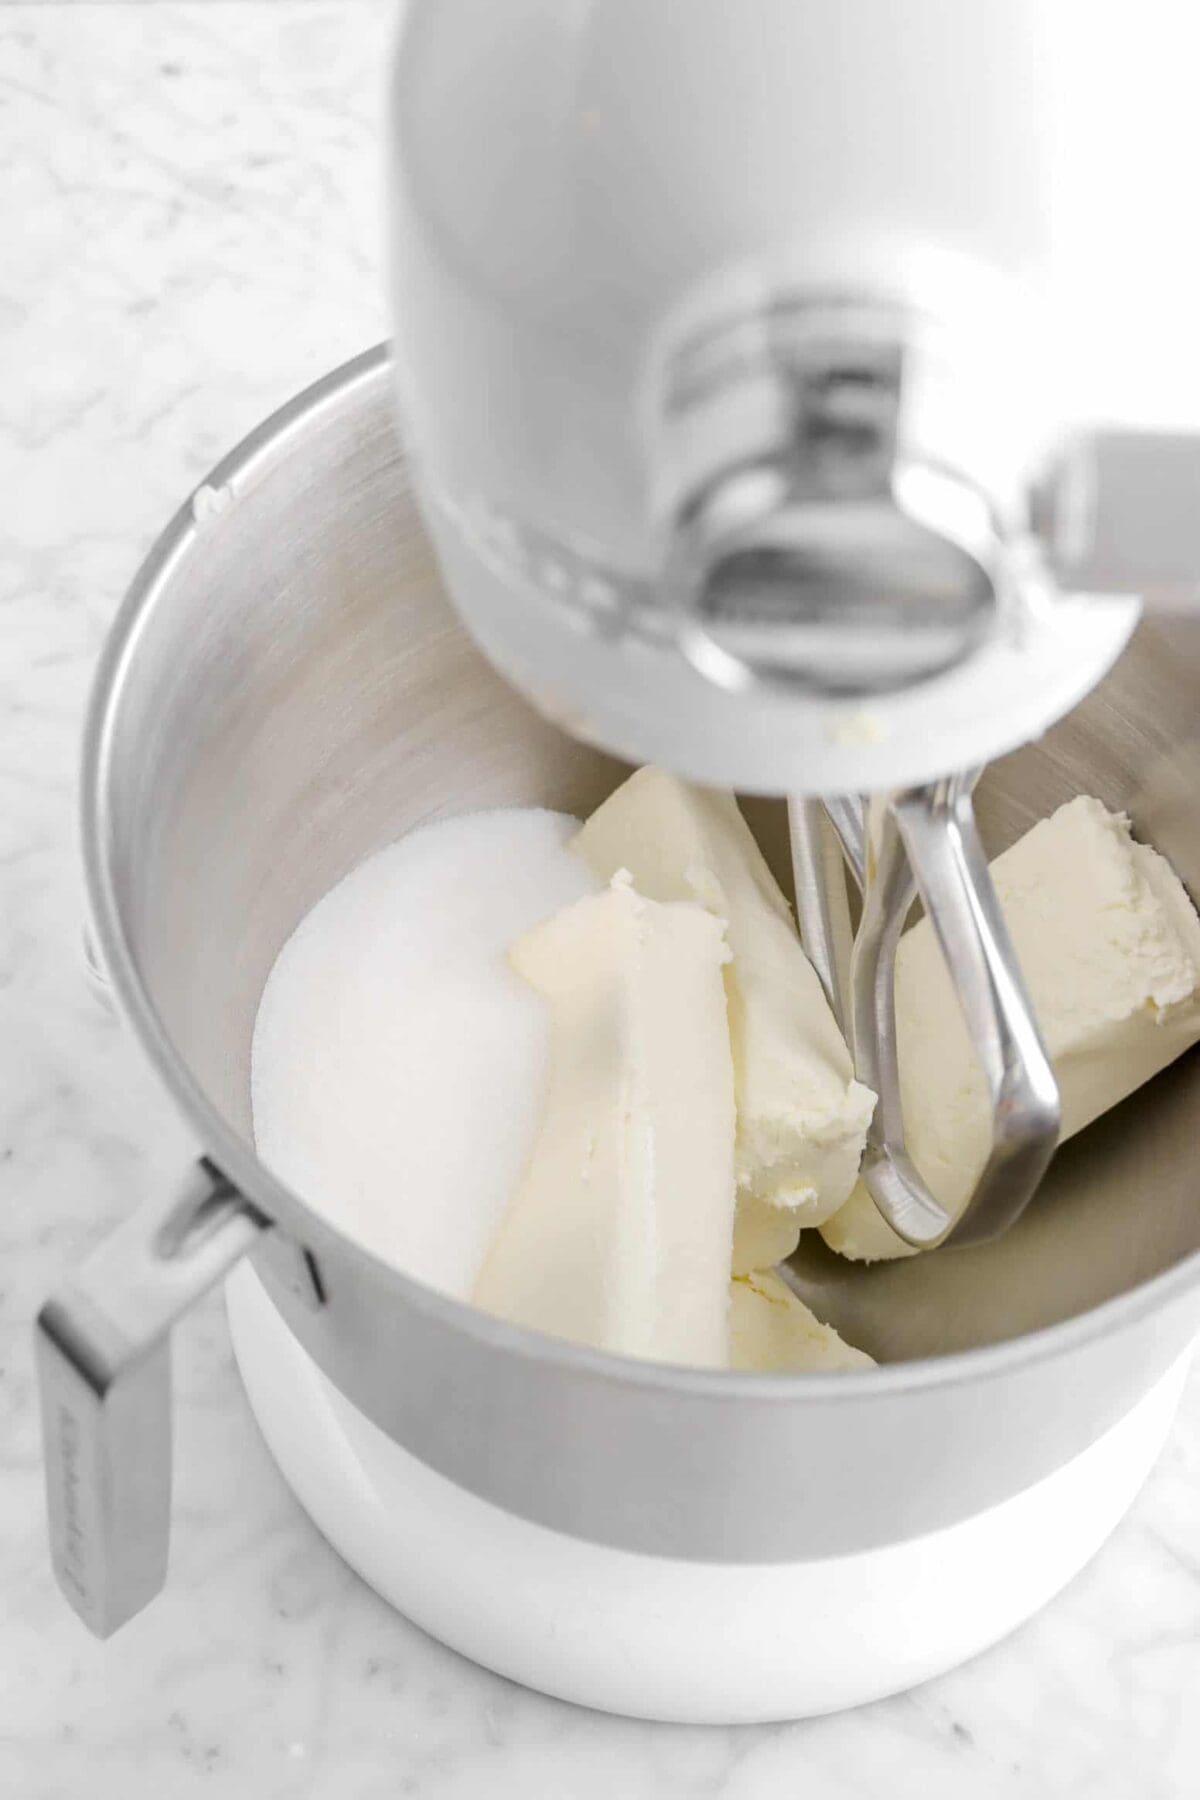 cream cheese and sugar in mixer